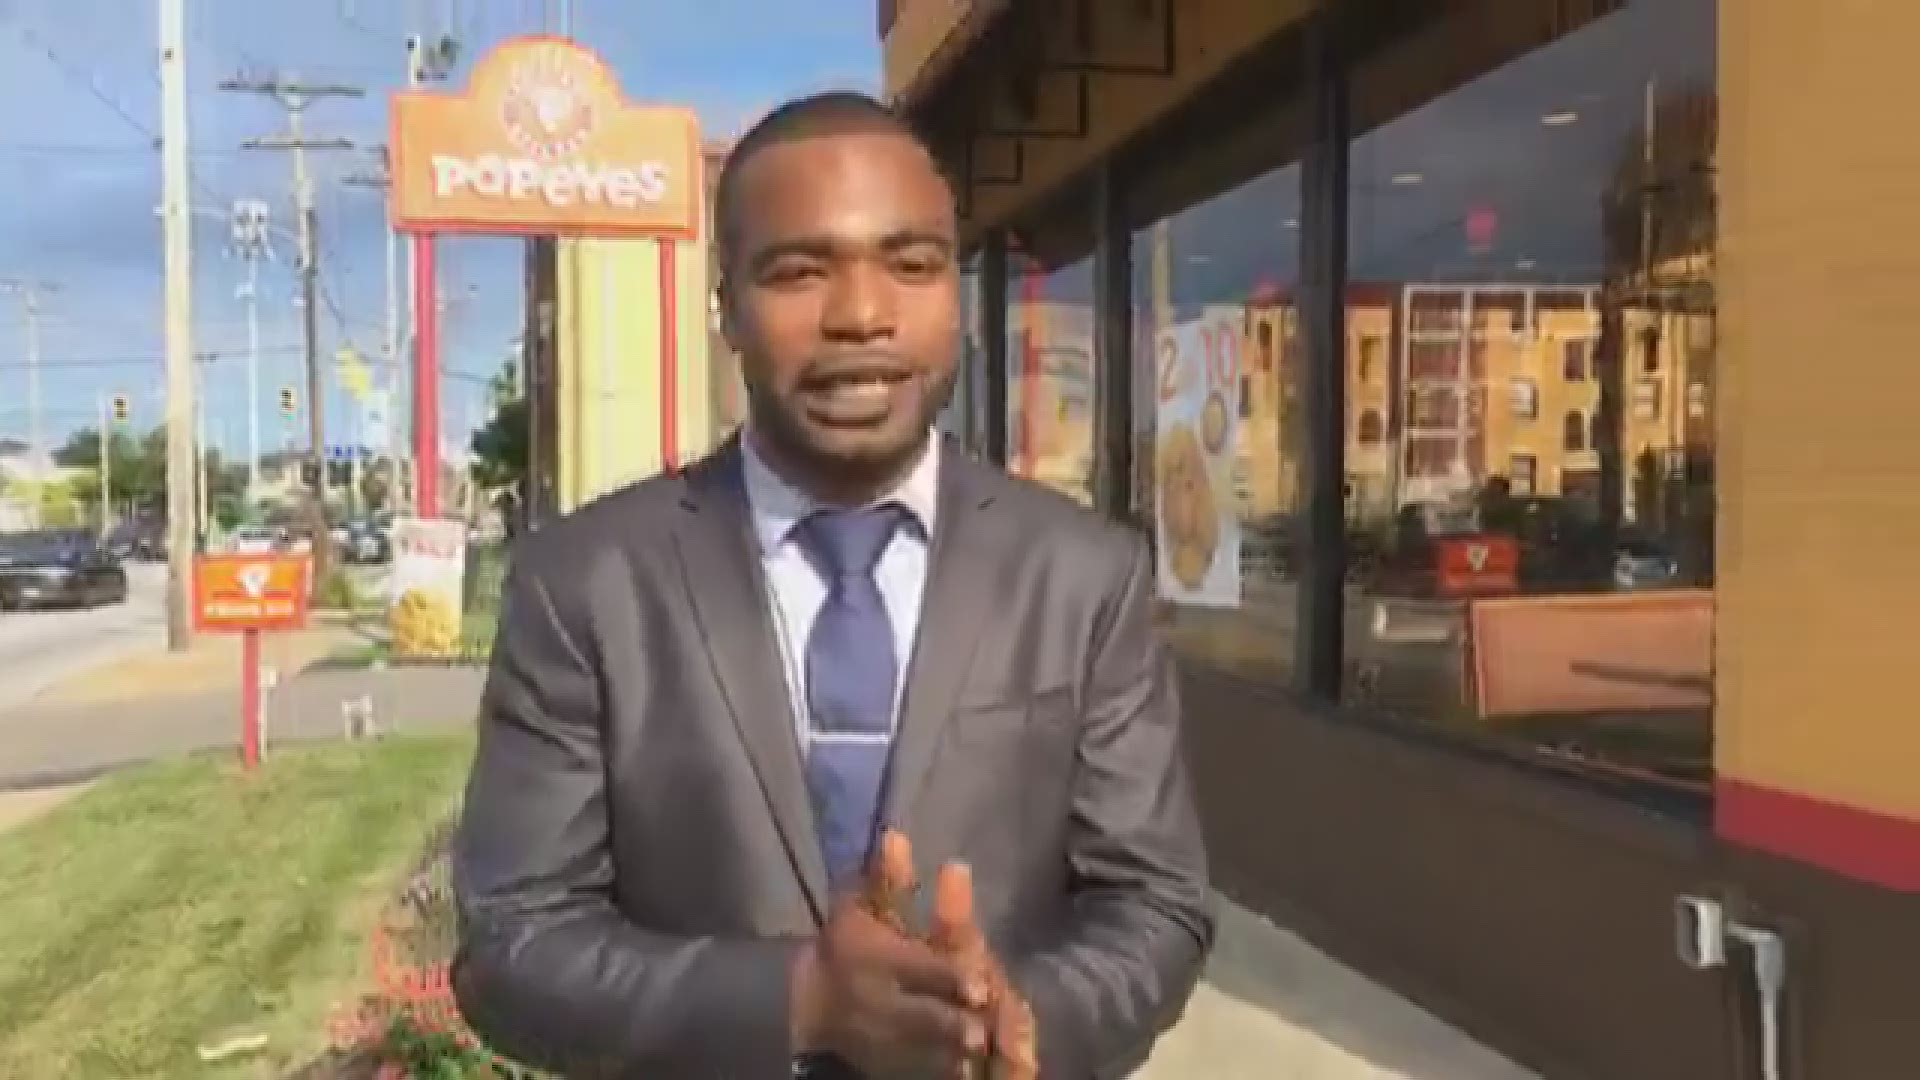 It’s the talk of social media, and it’s finally here! The Popeyes Chicken Sandwich is at a number of Cleveland locations, according to the owner of several of them. Have you tried it yet? Ray Strickland is at the one on Carnegie to find out if it lives up to the hype.